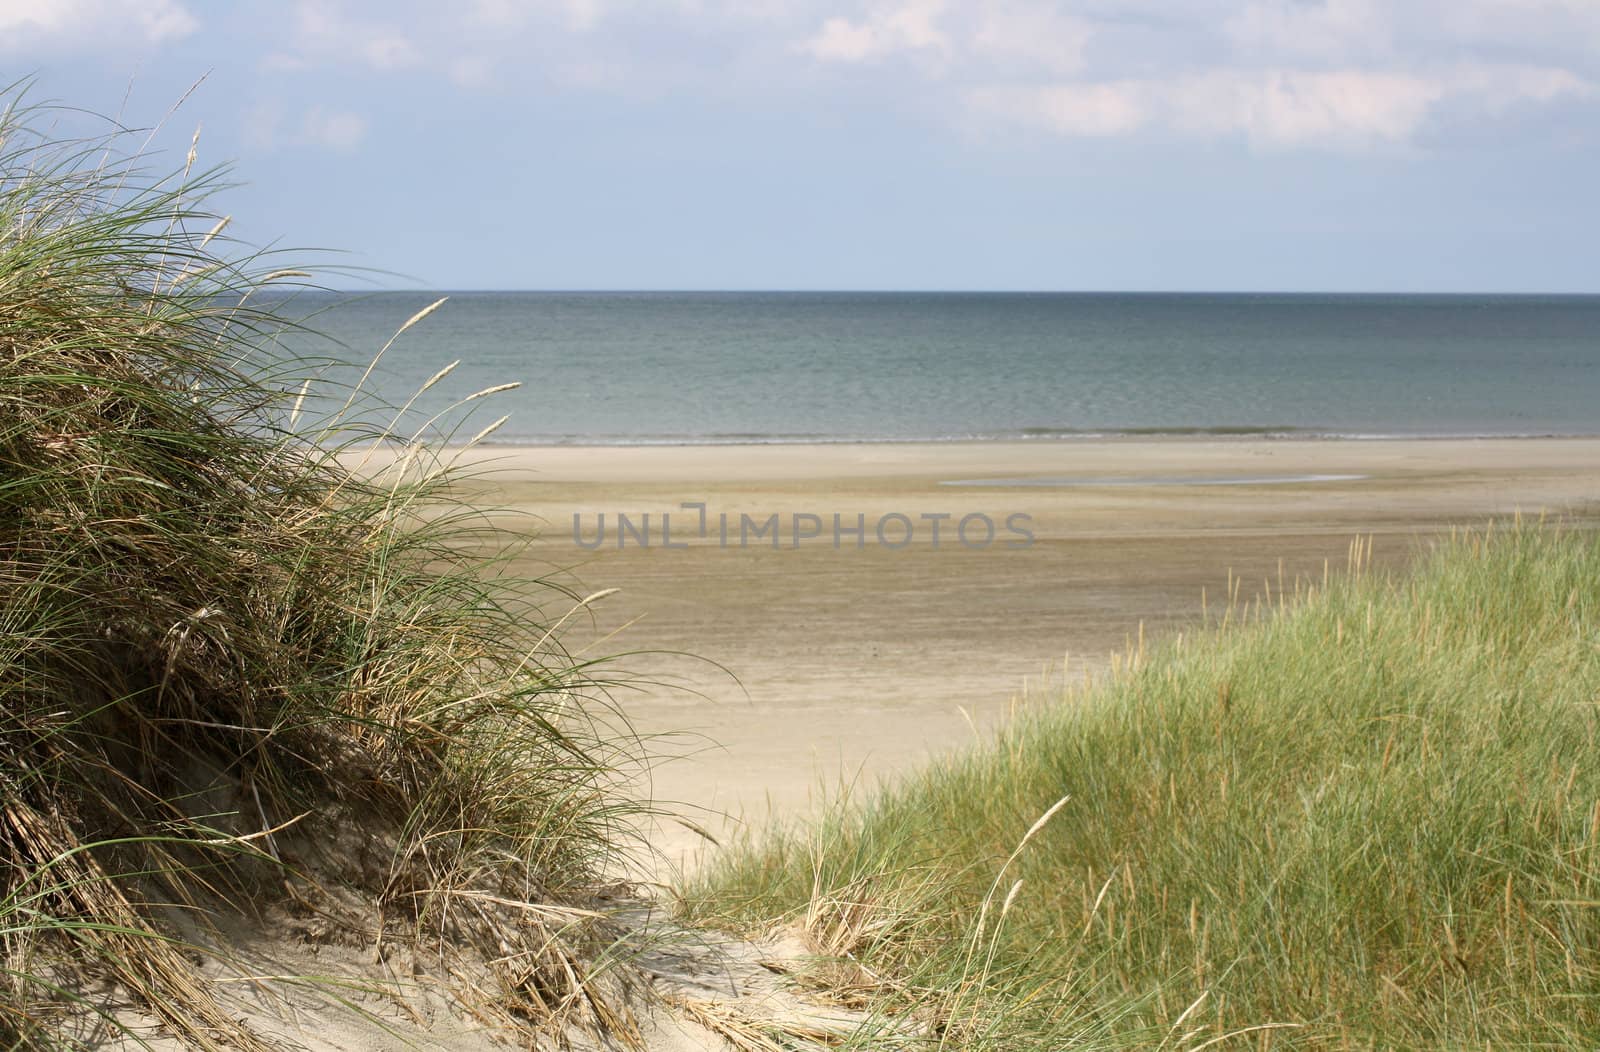 Dunes and the gorgeous wide beach of Jammerbugt, near Roedhus, North Jutland, Denmark, on a very sunny August day in 2010.